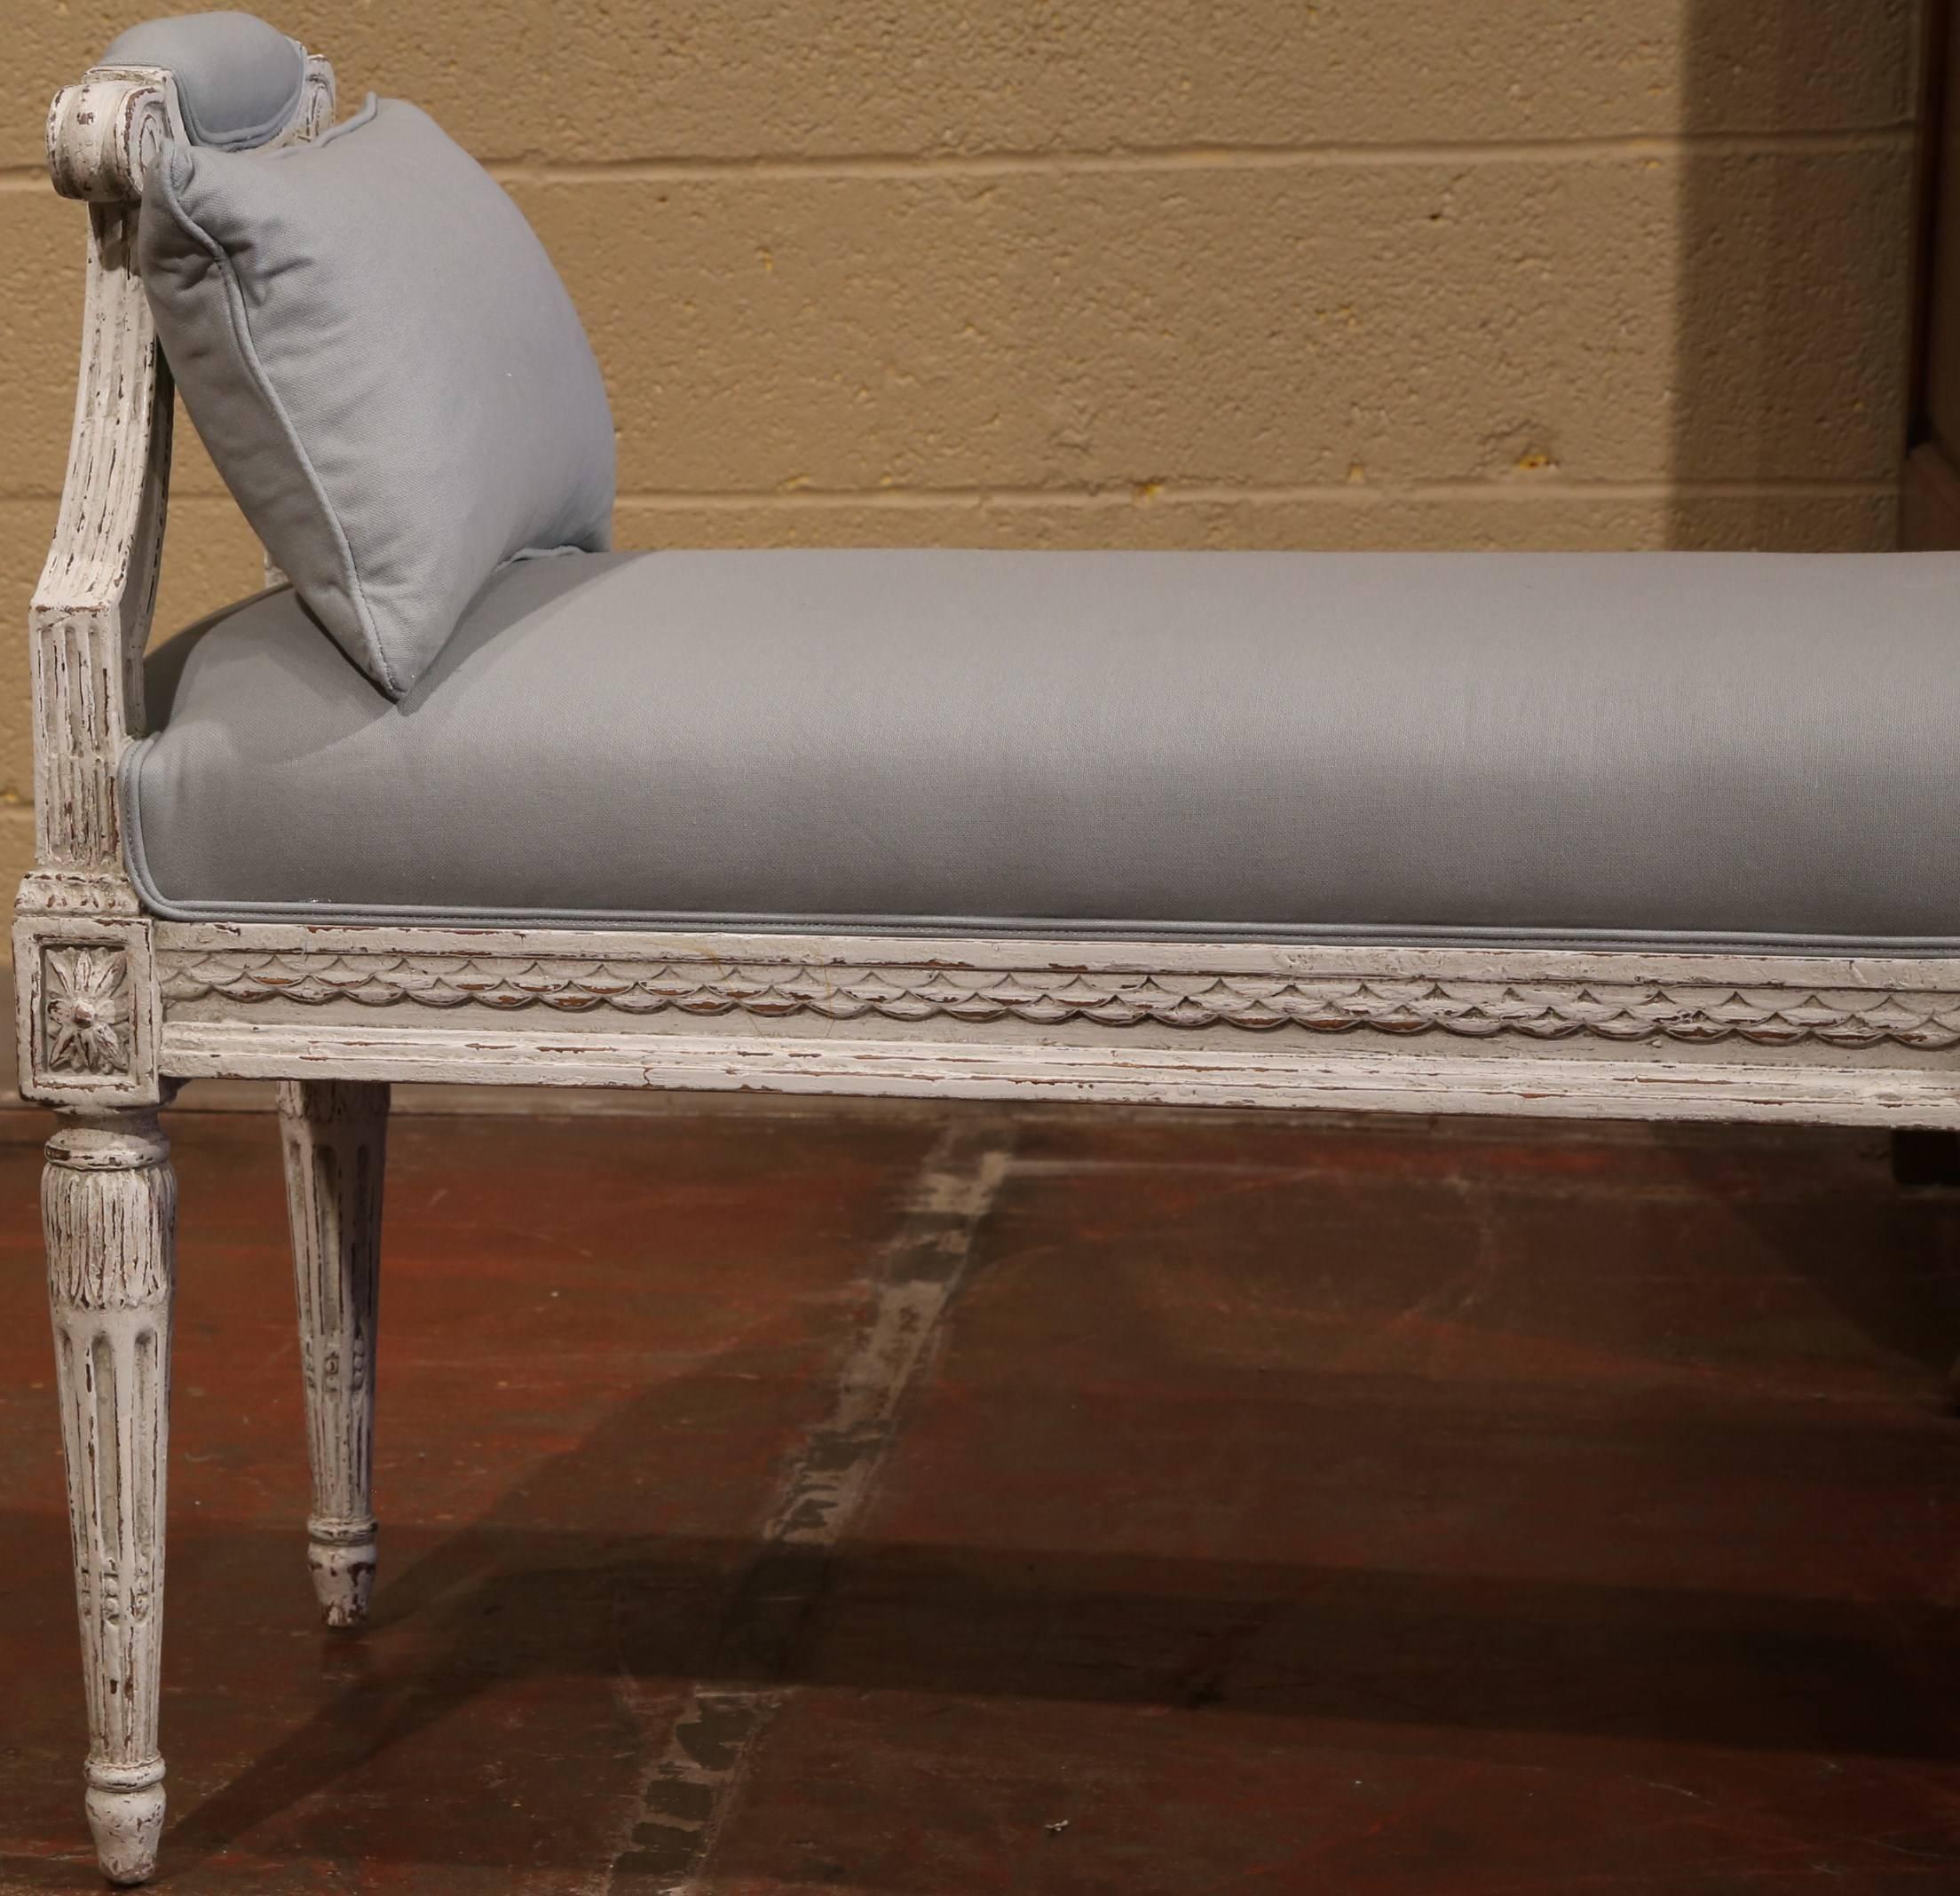 This elegant antique six-legged bench from France was crafted, circa 1890. The beautiful piece has a carved apron embellished with rosettes, and tapering, fluted legs. Complete with a patinated, painted finish and grey upholstered cushions, the long